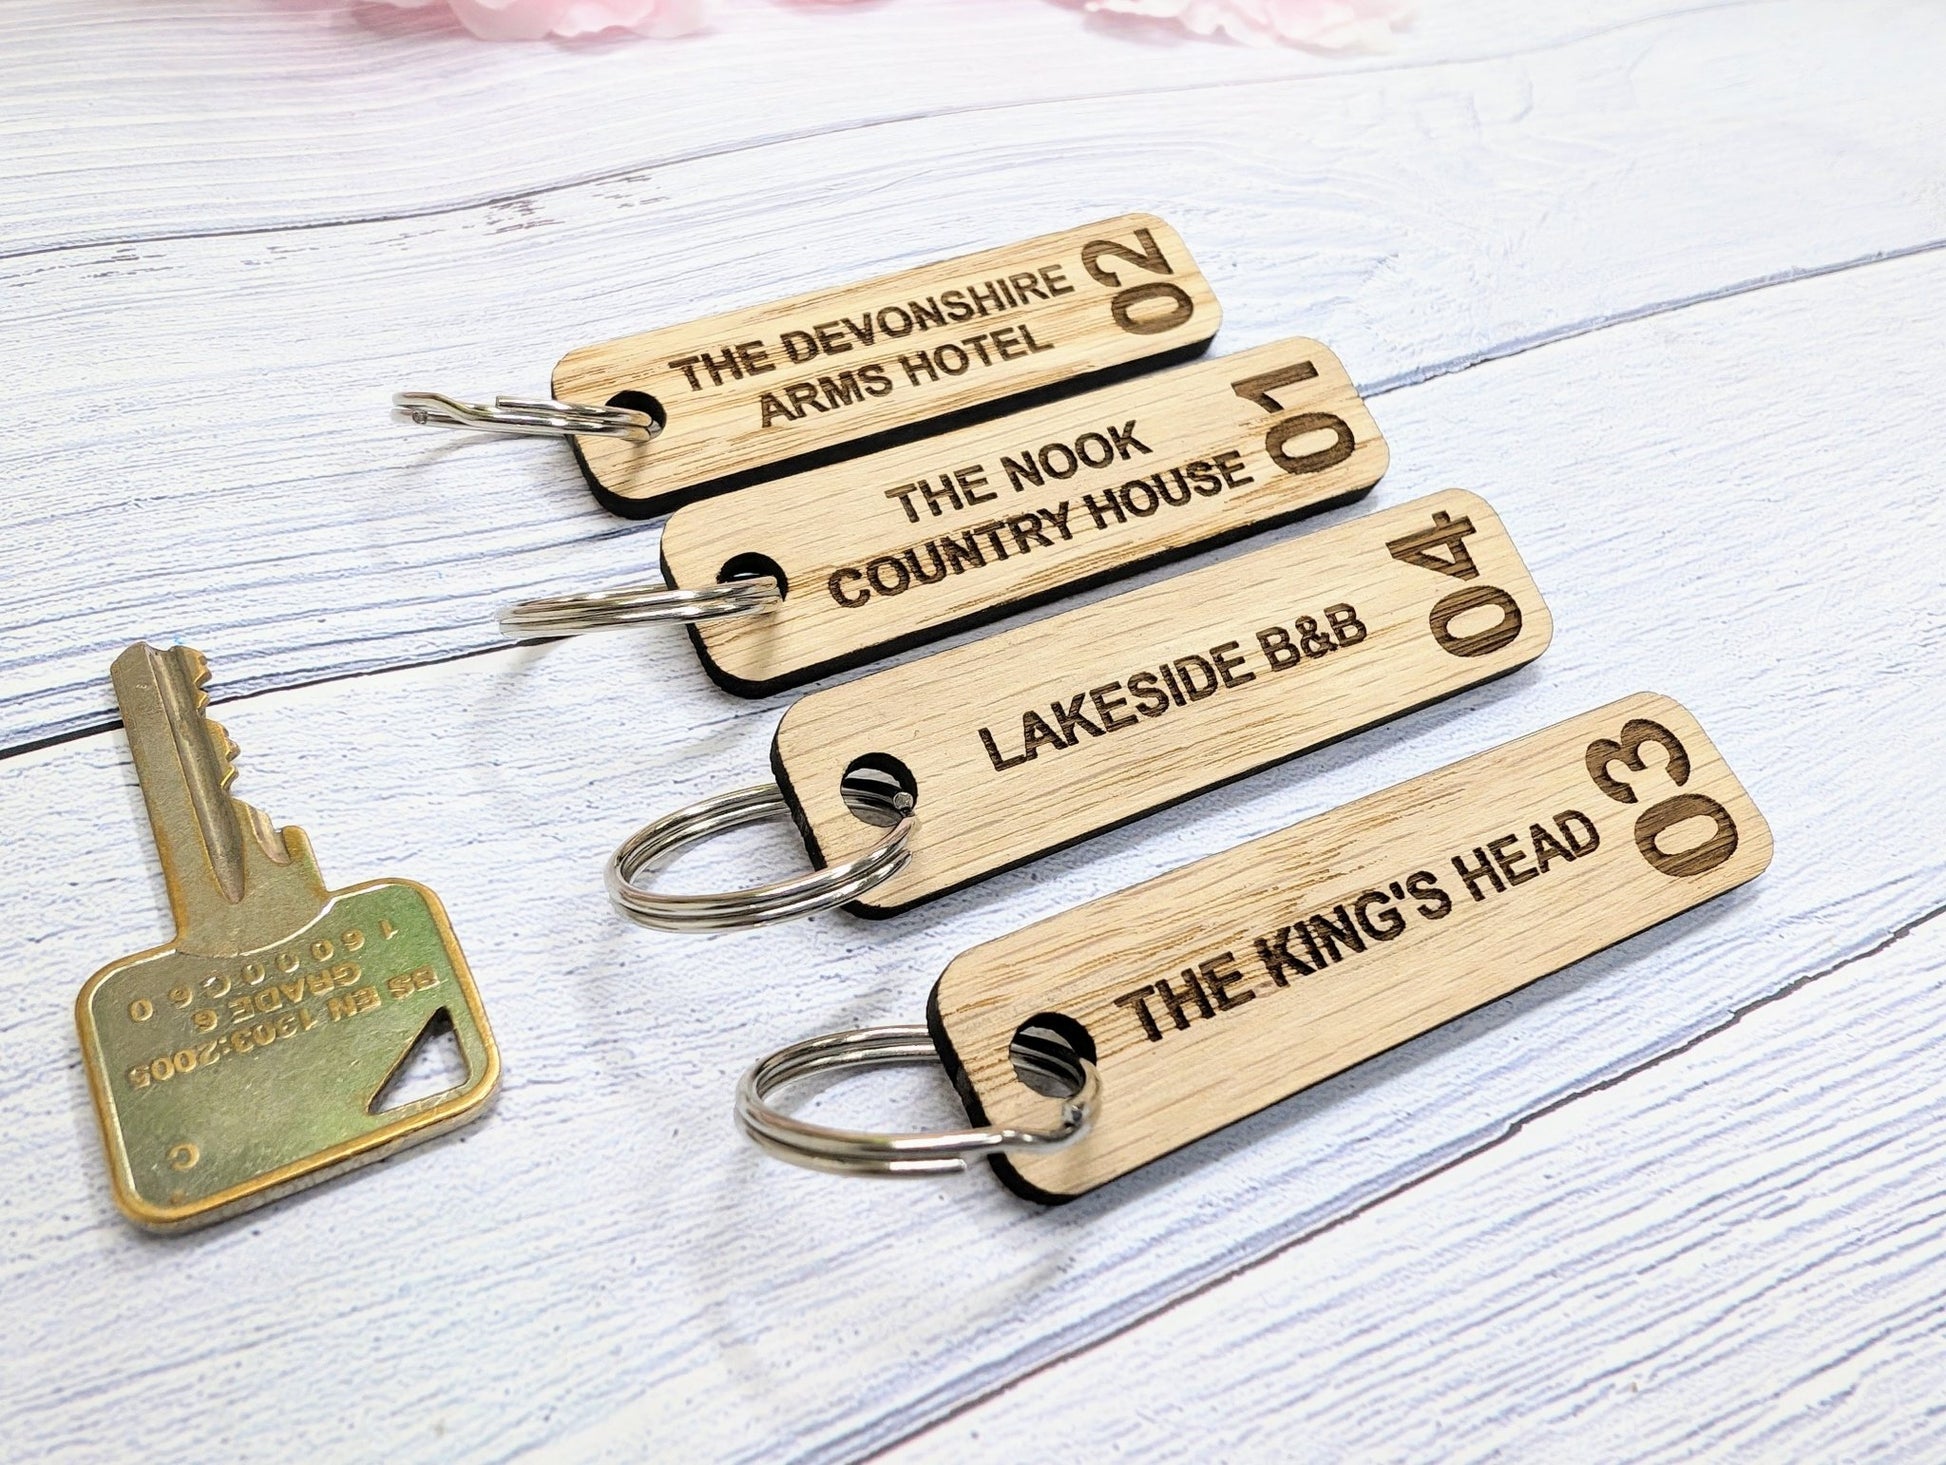 Personalised Hotel Room Number Keyrings with Hotel Name - 80 x 25mm - High-Quality Oak Veneered MDF - Ideal for Hotels, B&Bs, and Guest Houses - CherryGroveCraft